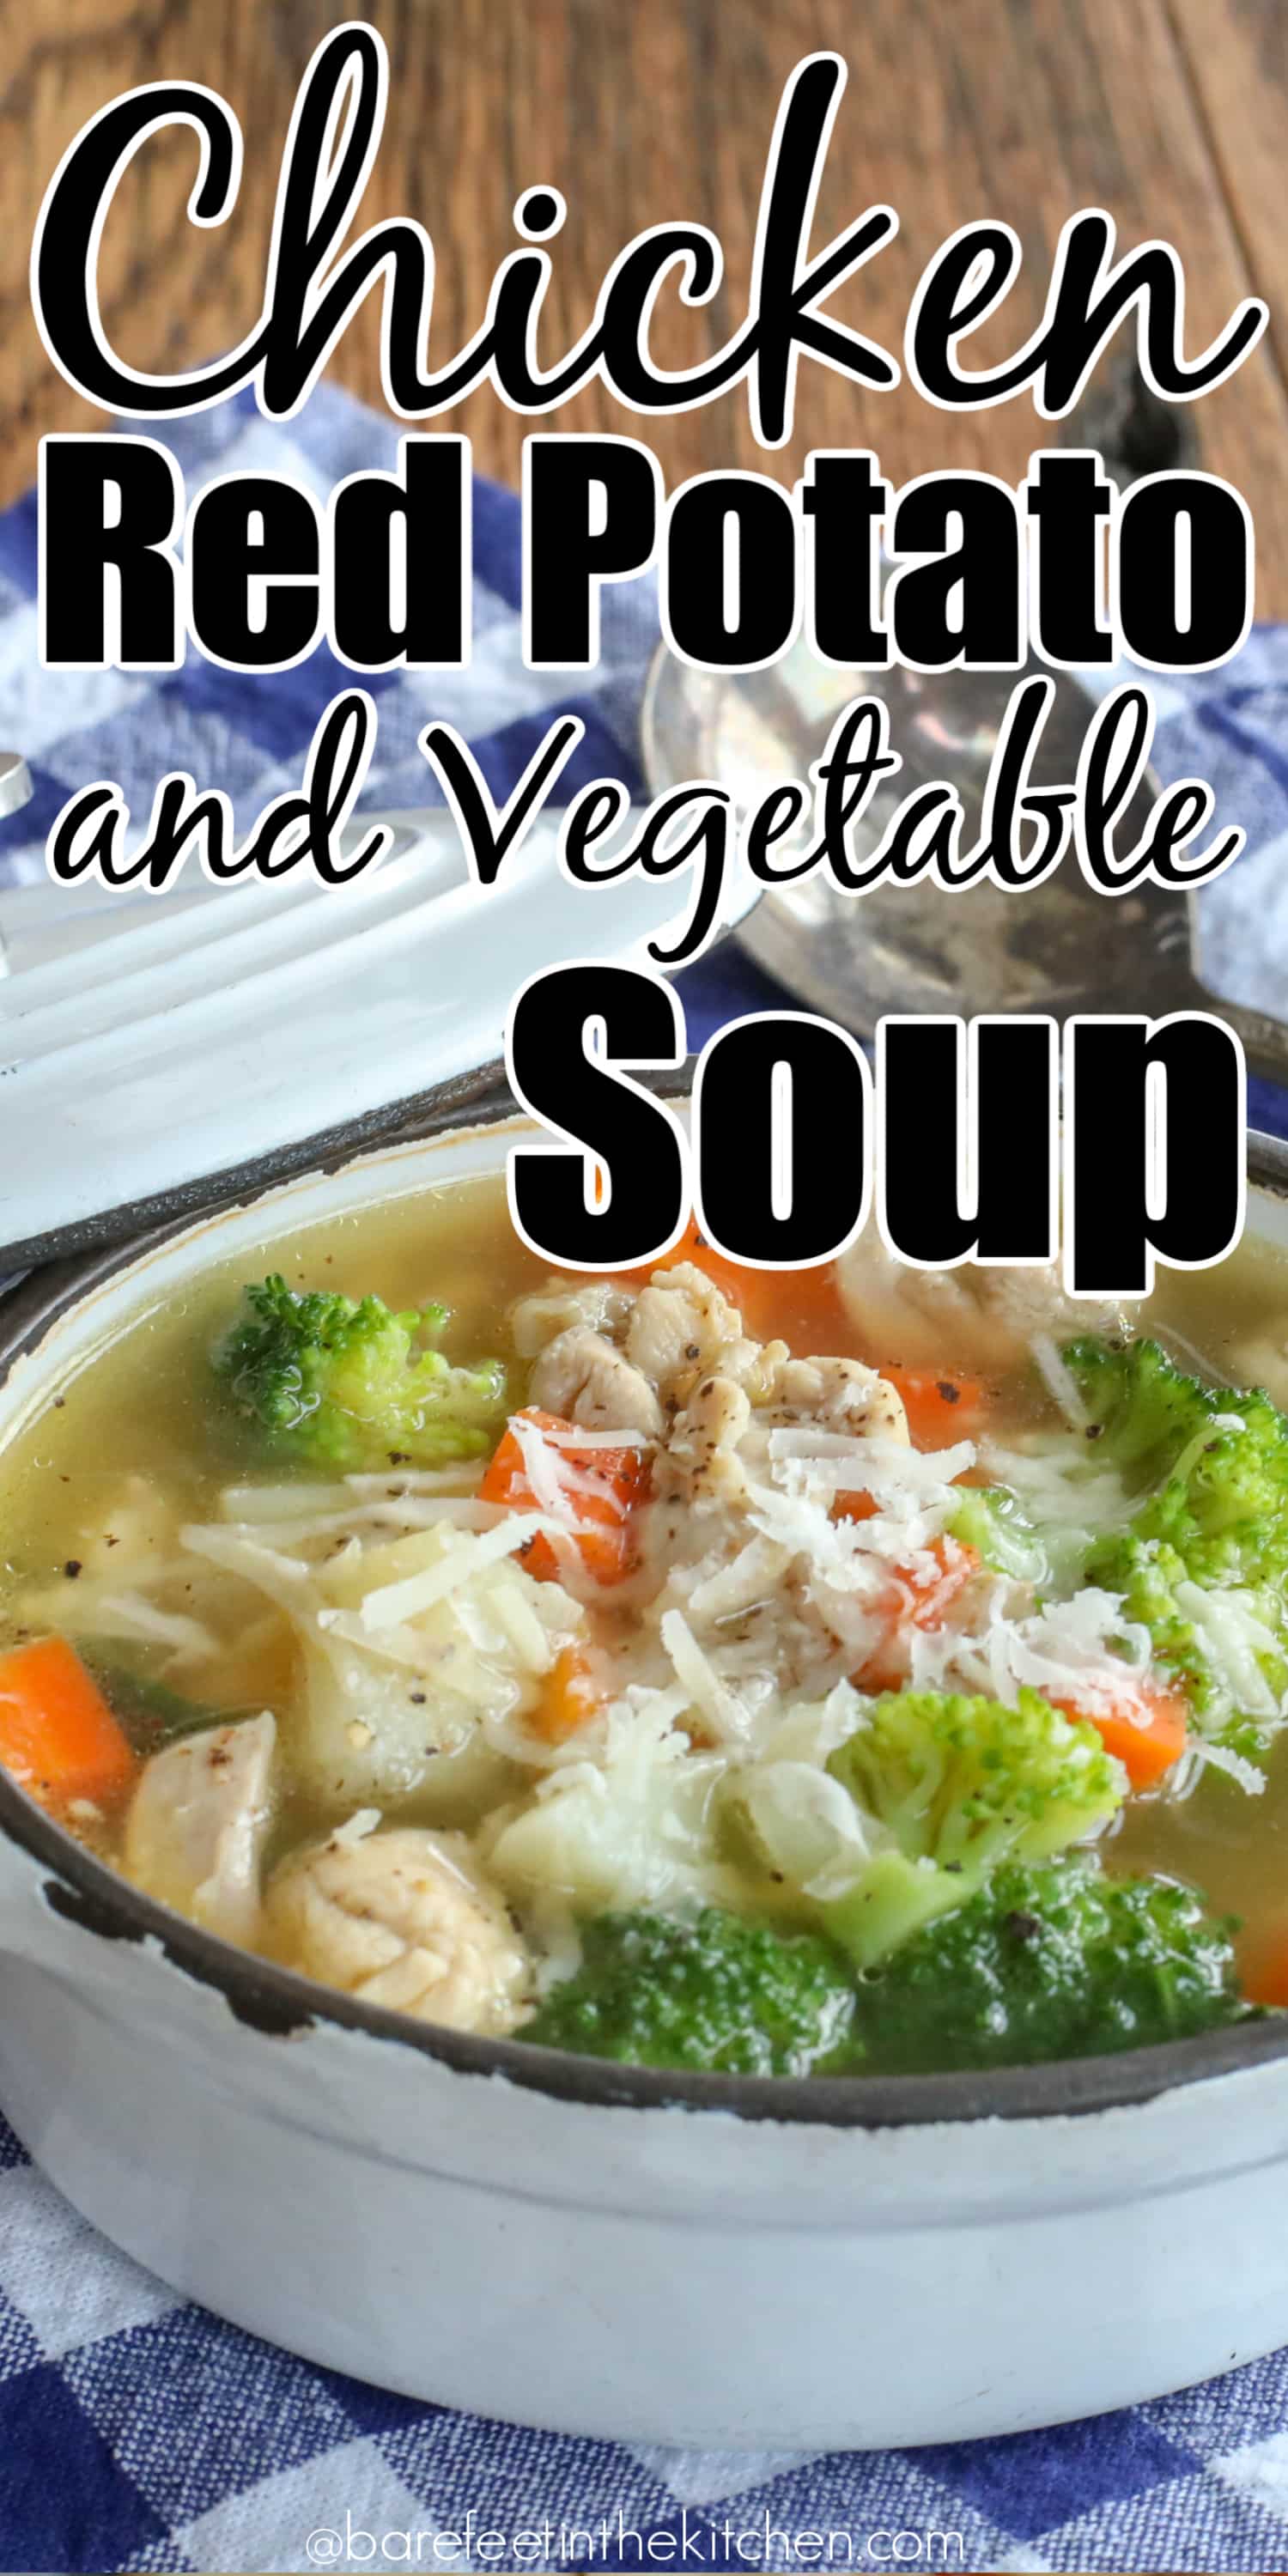 Chicken Vegetable Soup with Red Potatoes - Barefeet in the Kitchen